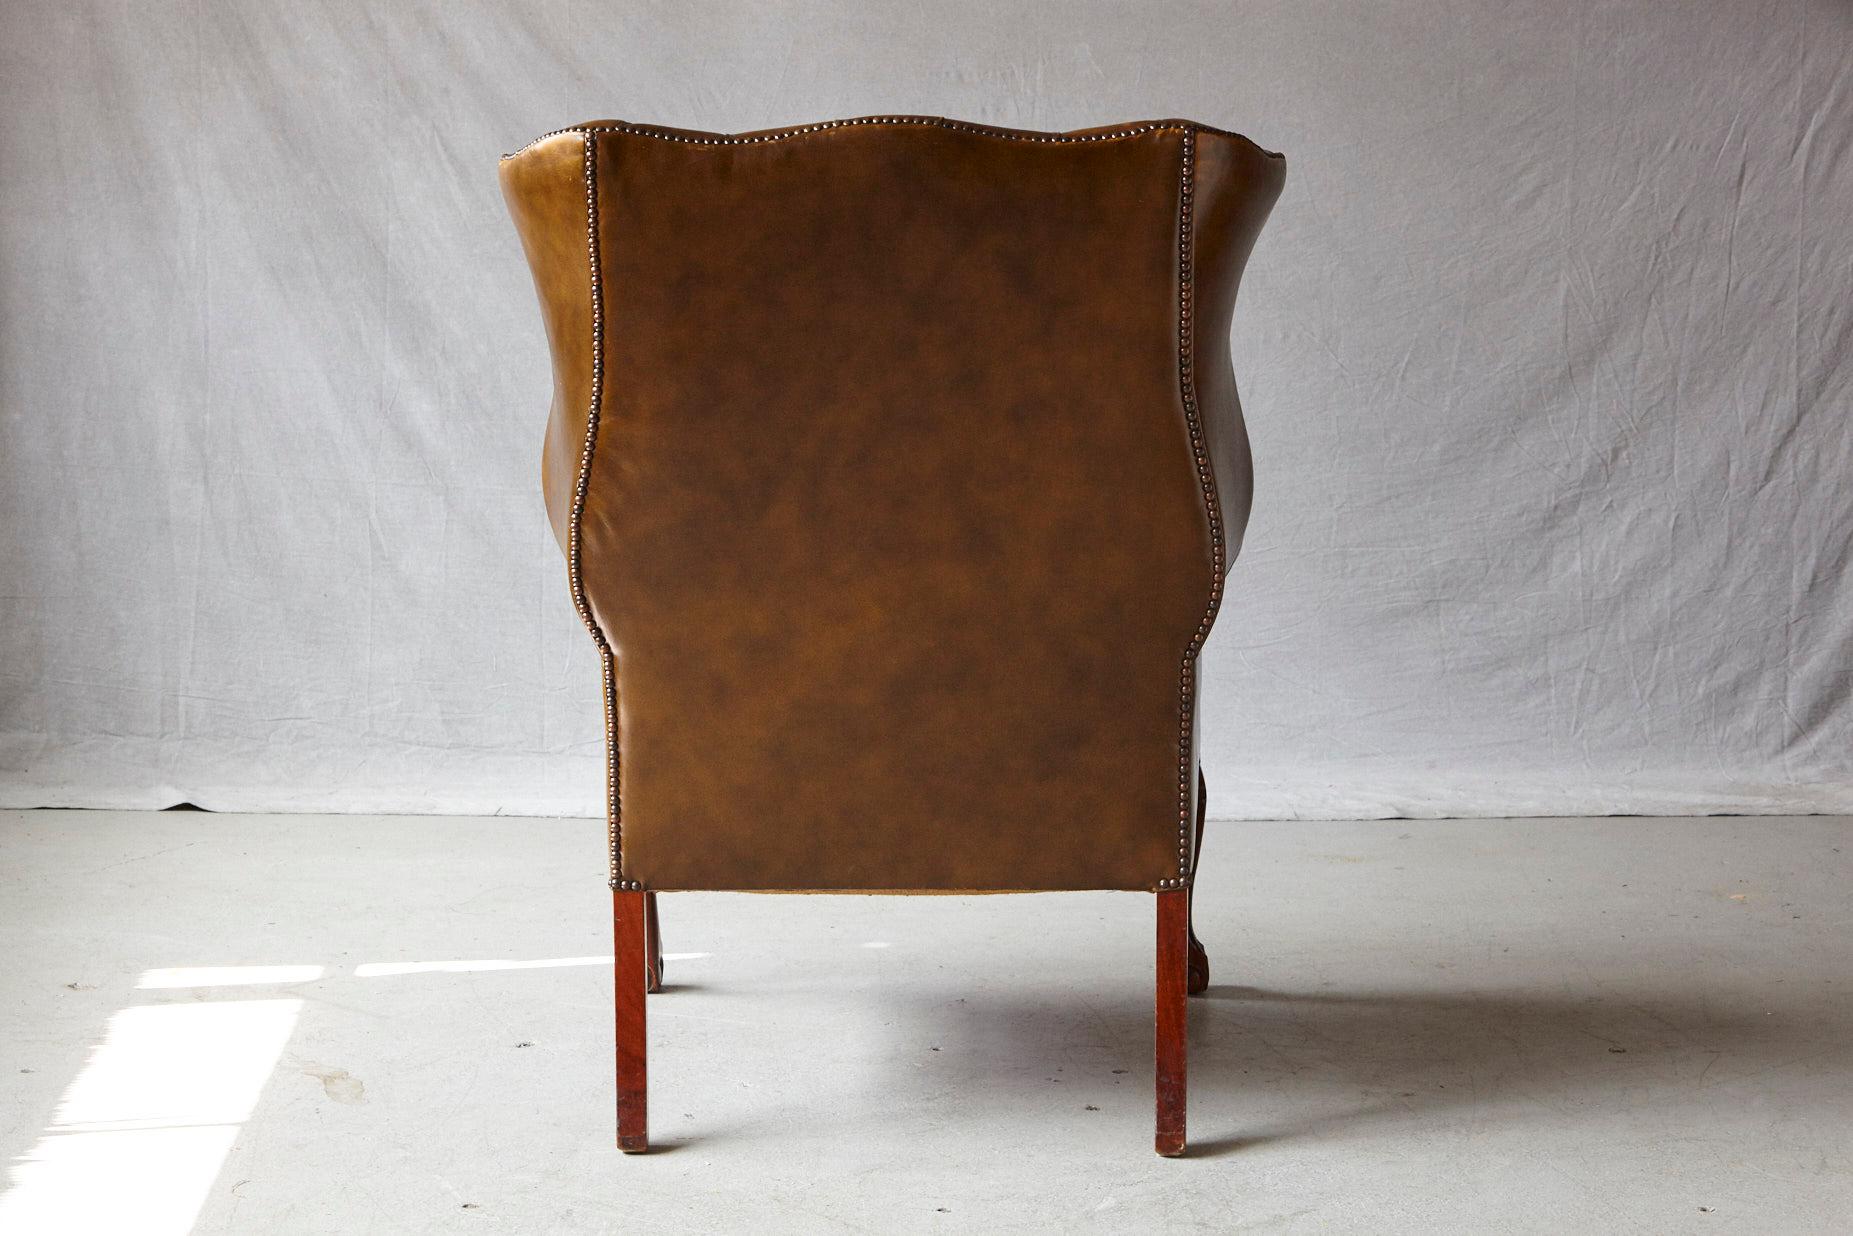 Buckingham Walnut Burnished Leather Wingback Chair by Hancock & Moore 1